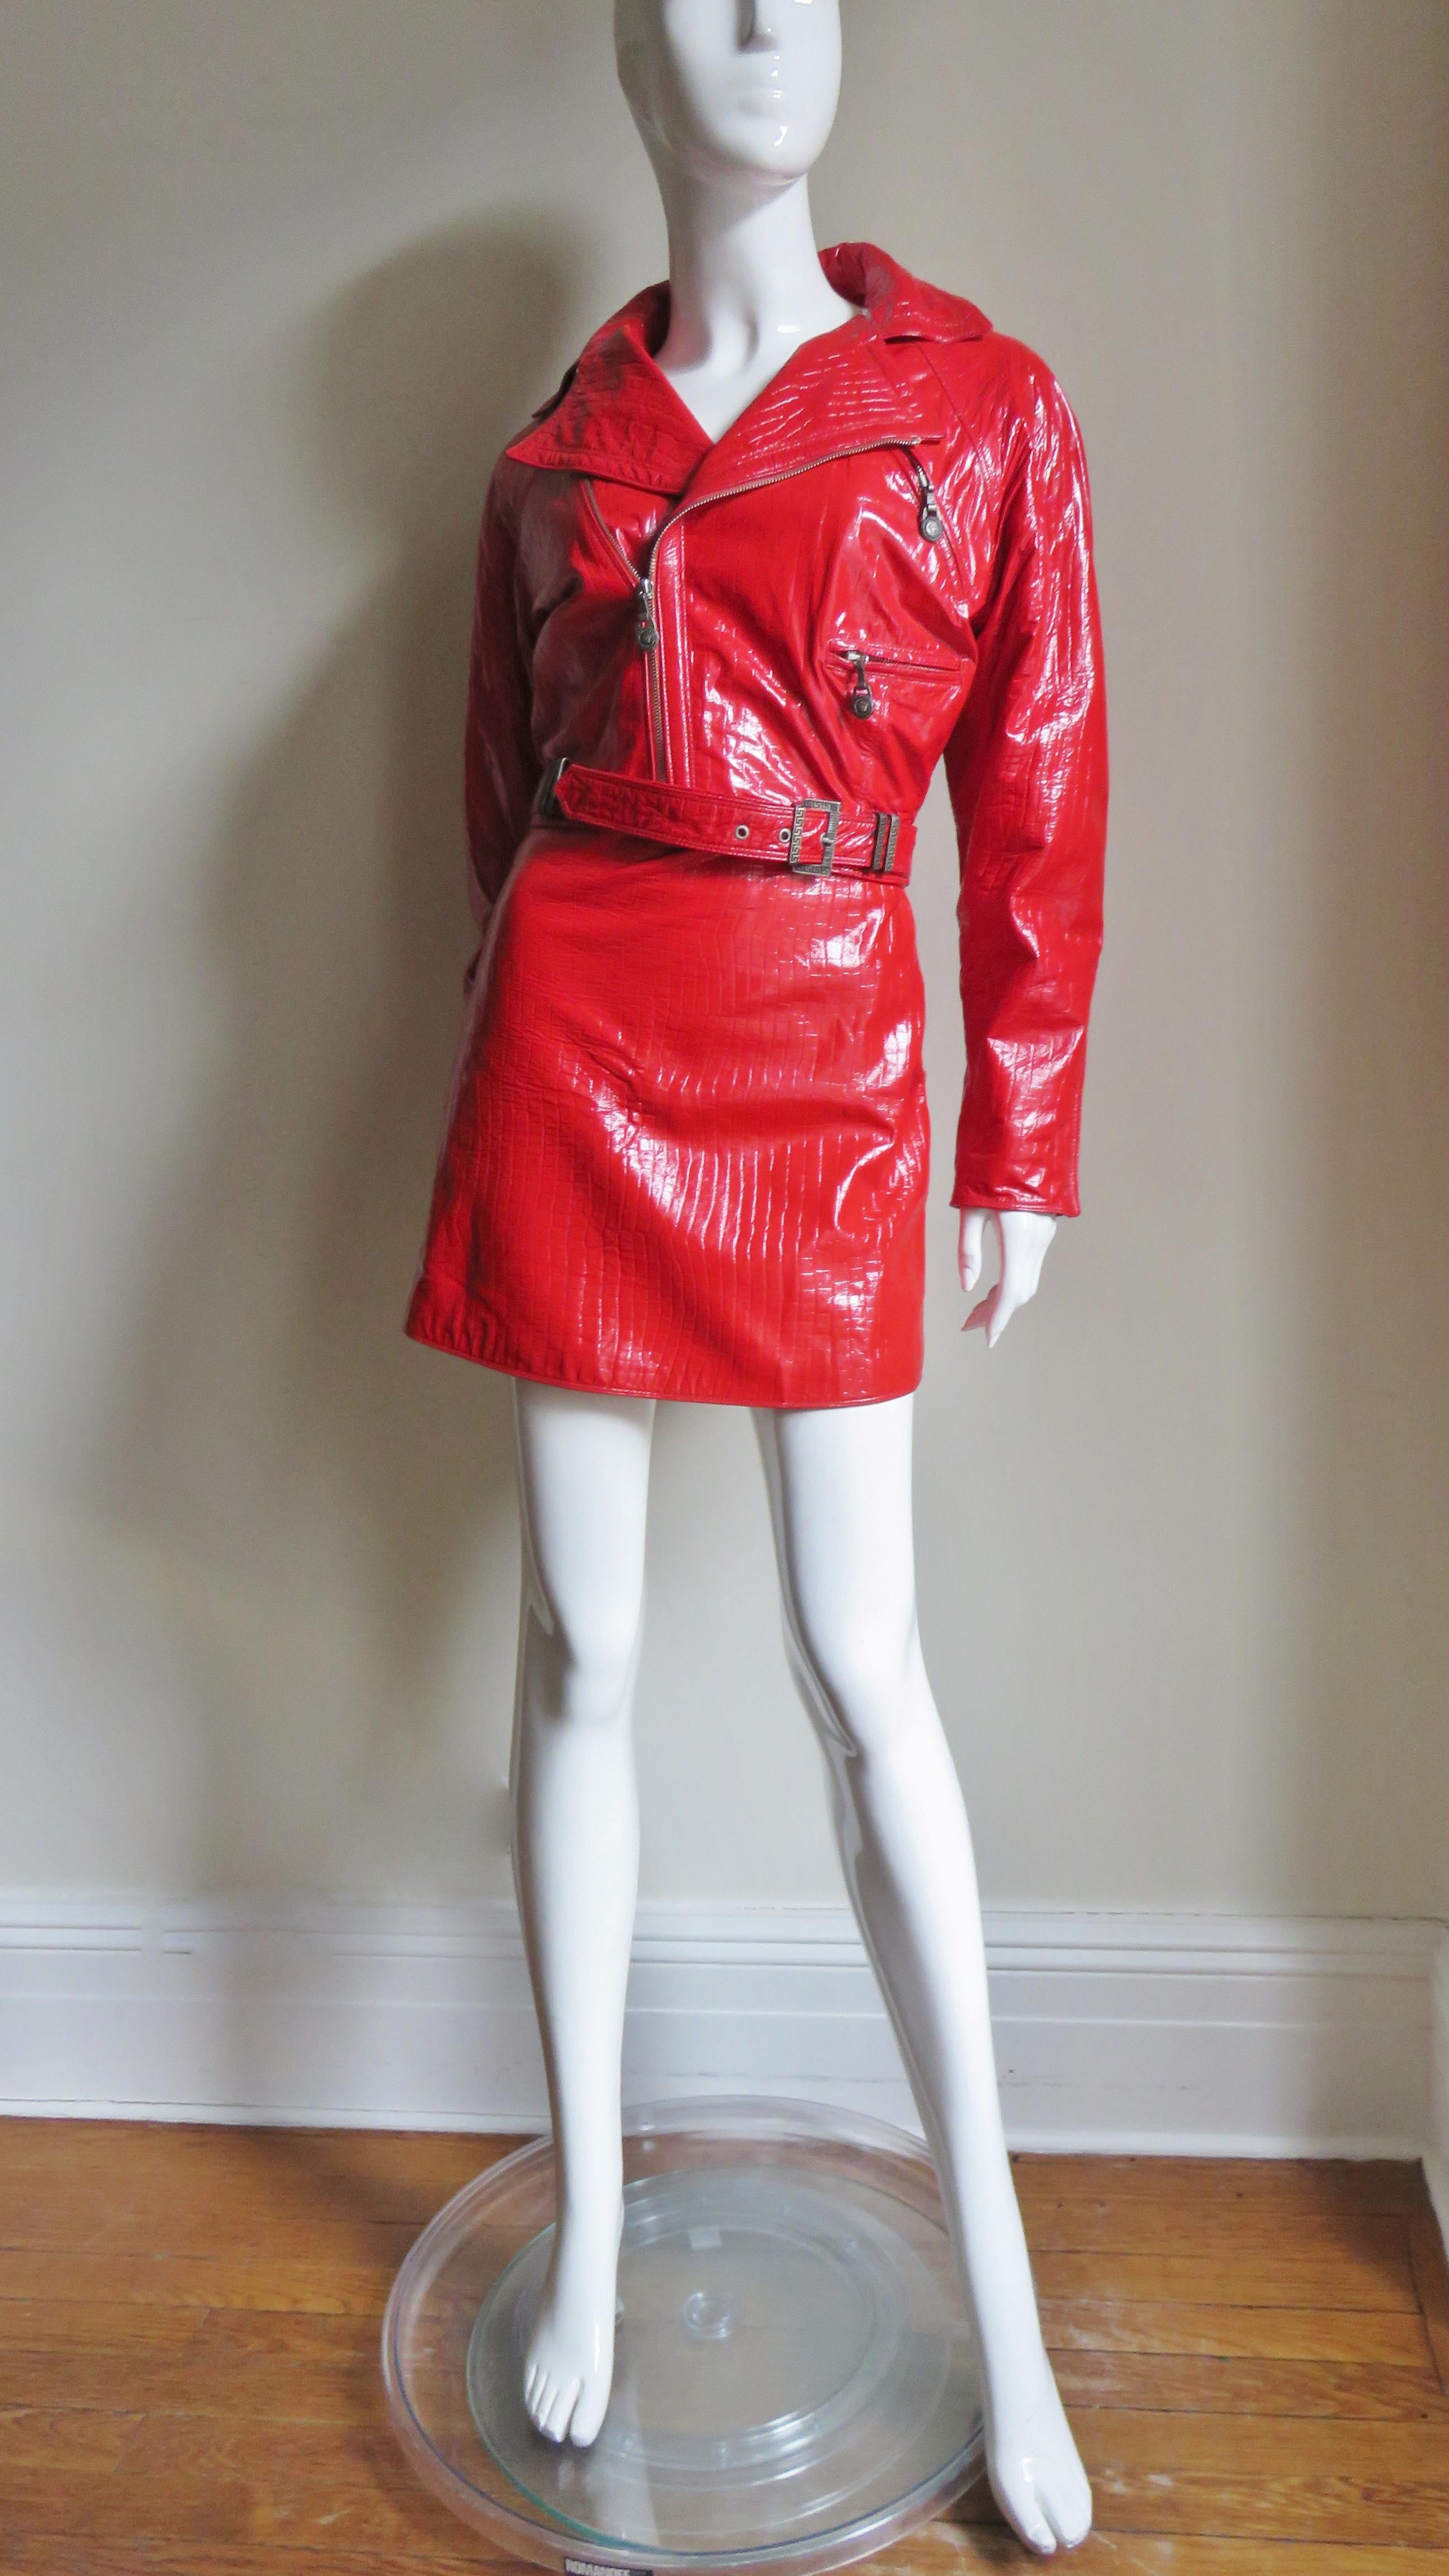 Gianni Versace Red Leather Motorcycle Jacket and Skirt A/W 1994 In Good Condition For Sale In Water Mill, NY